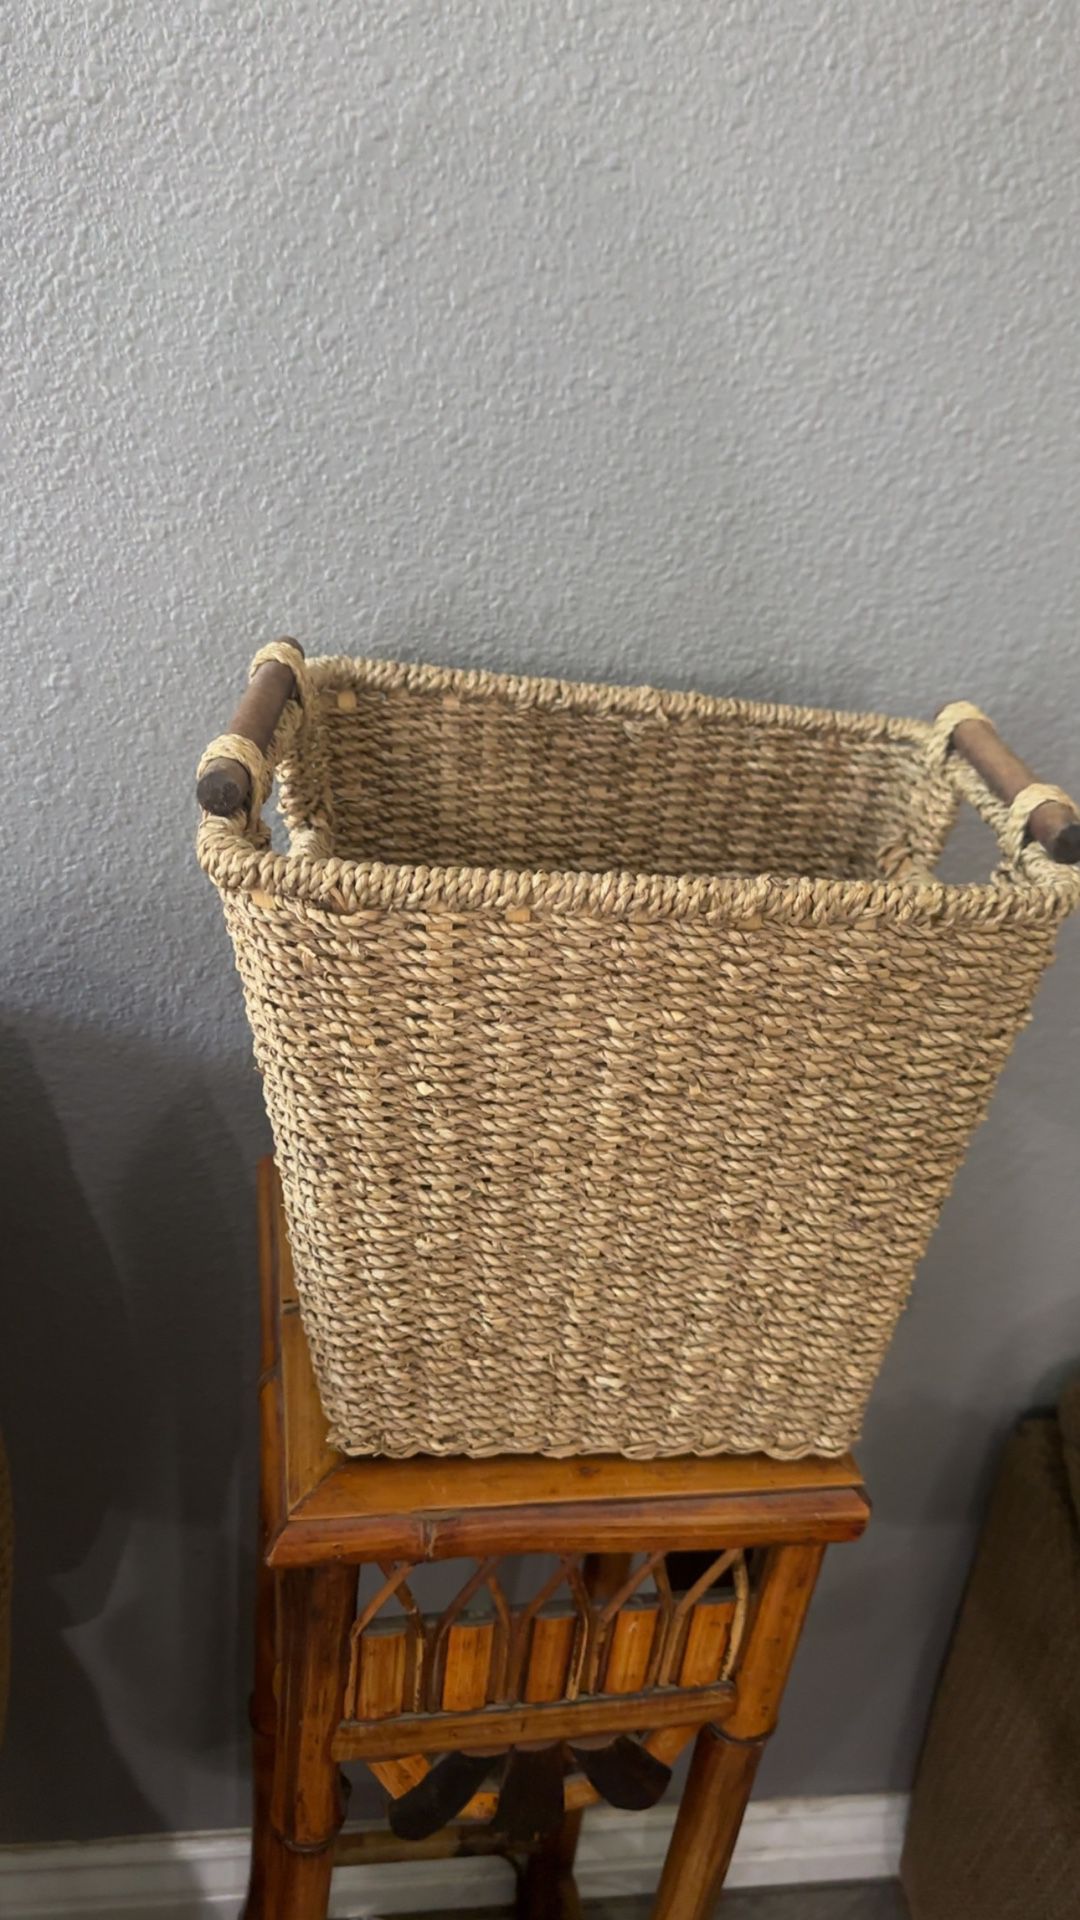 Basket Could Be Used For Trash Can 